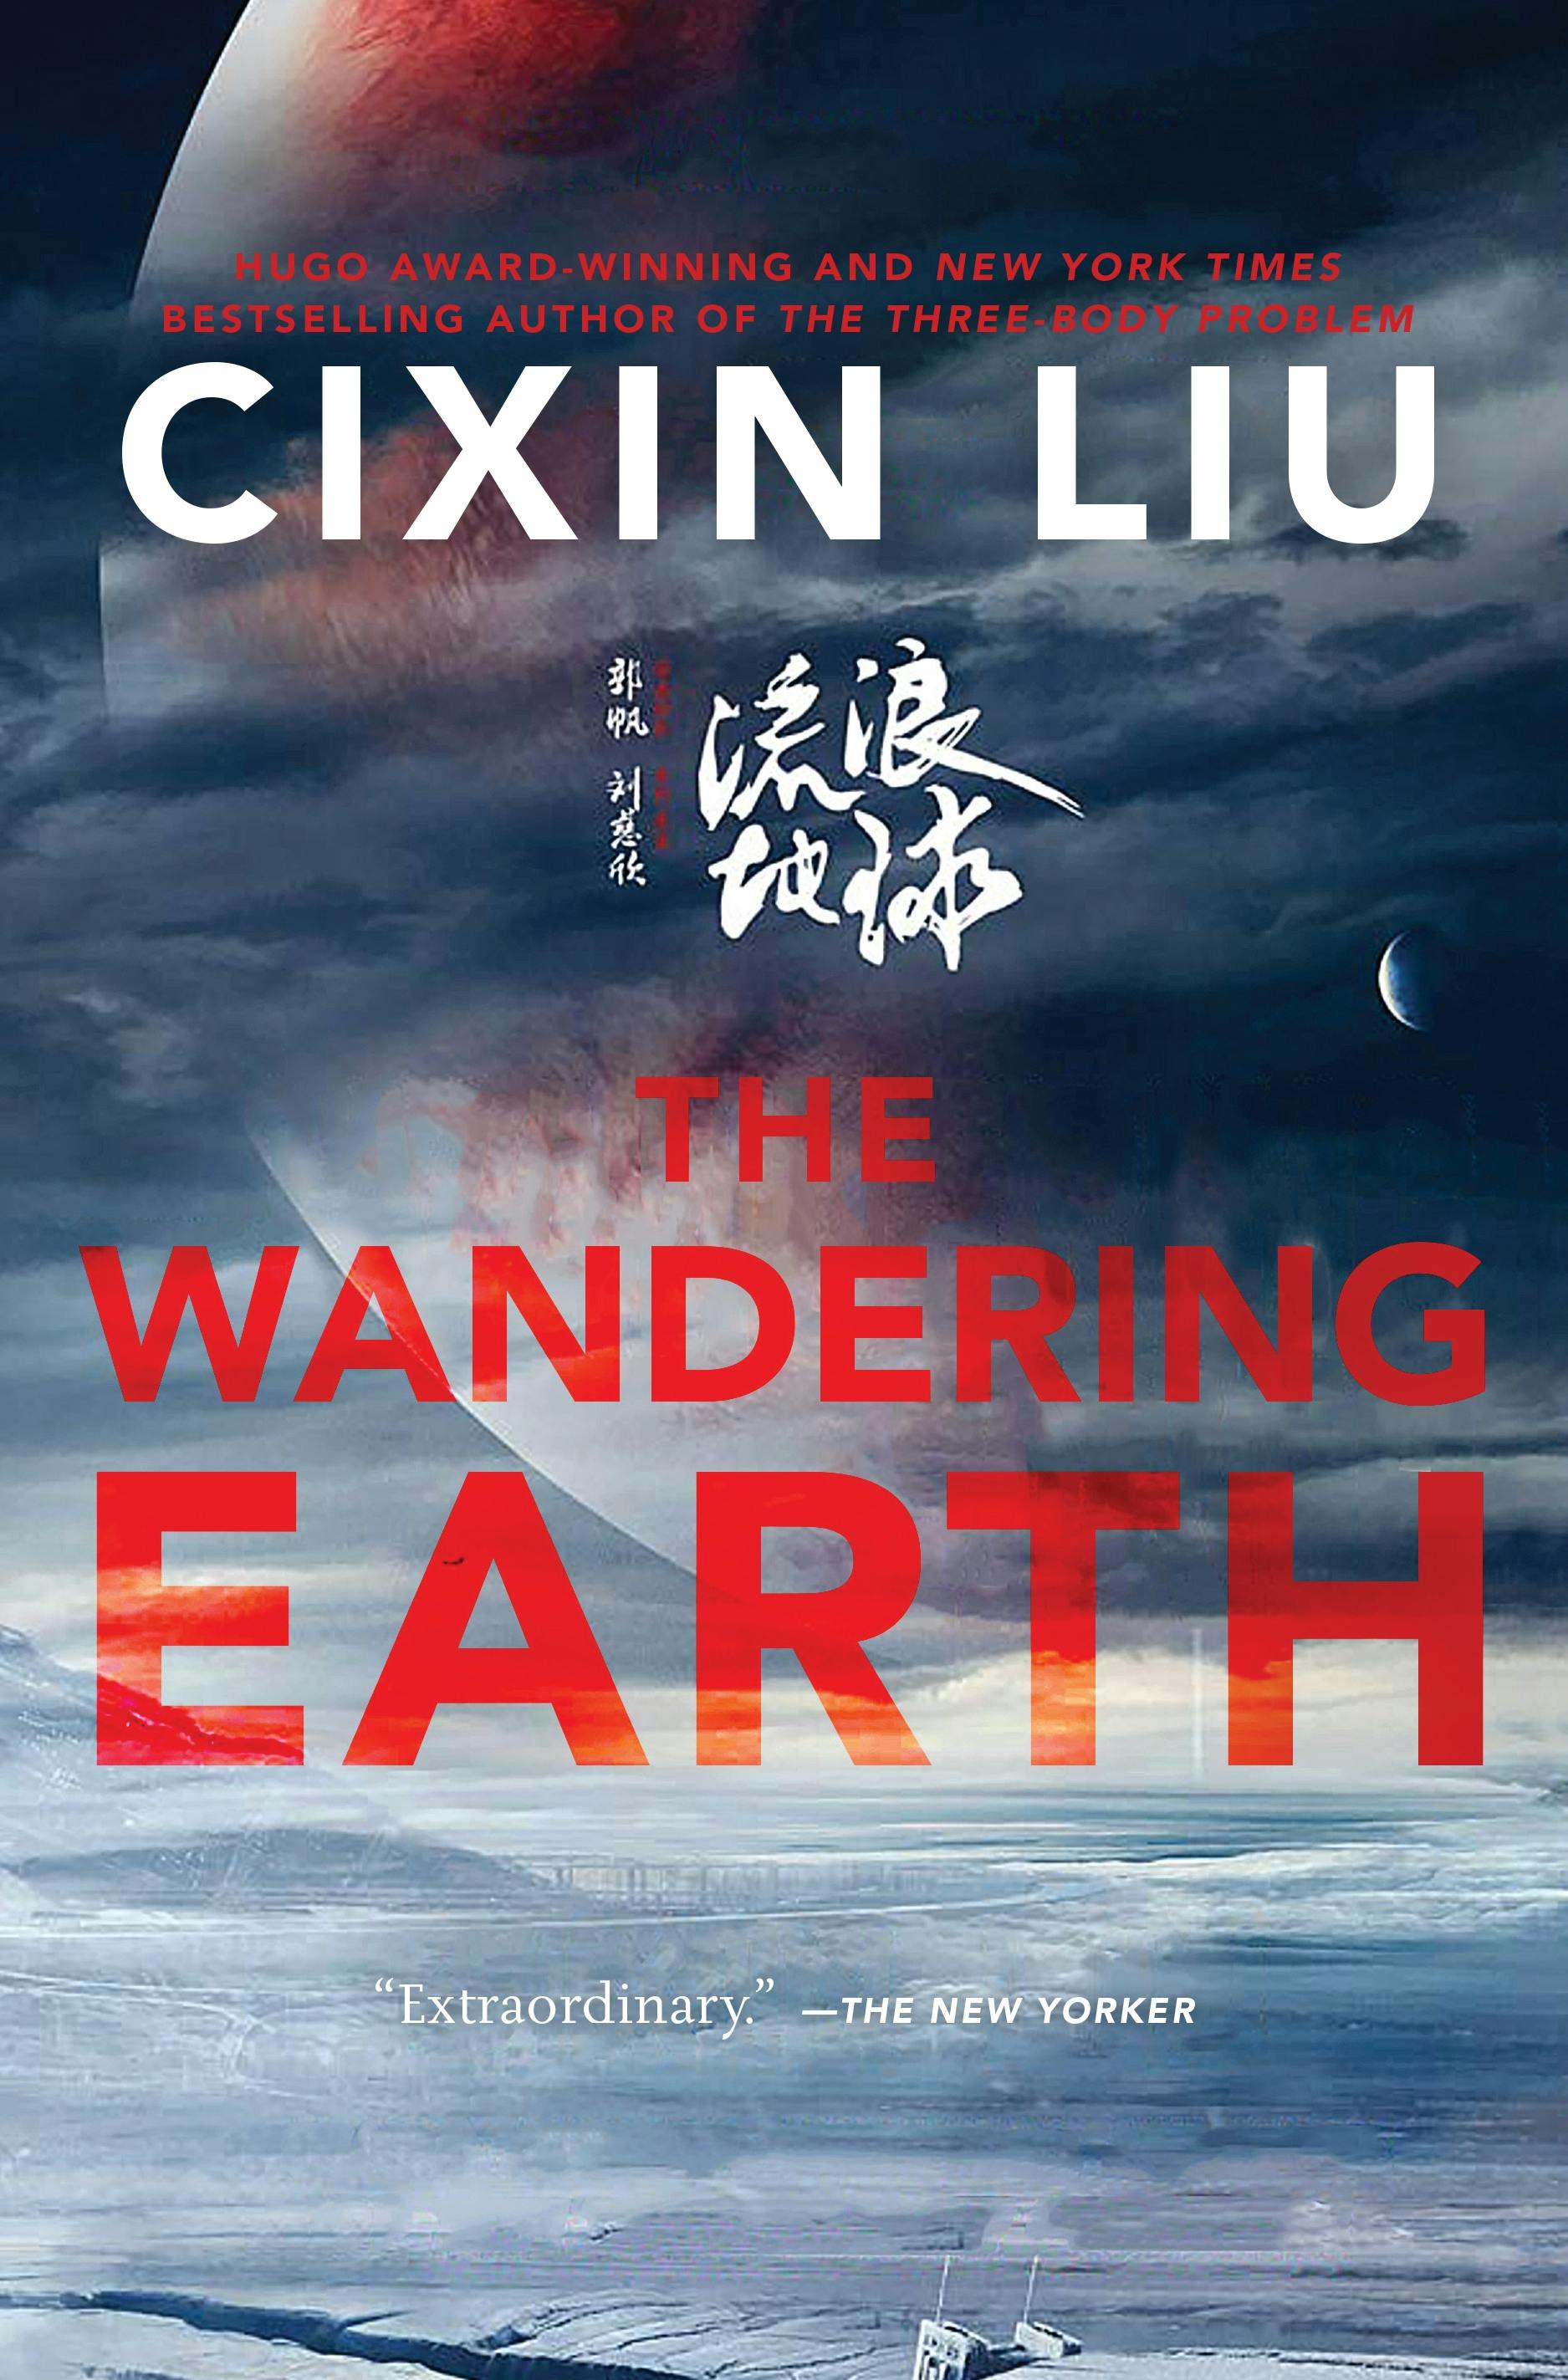 Cover for the book titled as: The Wandering Earth